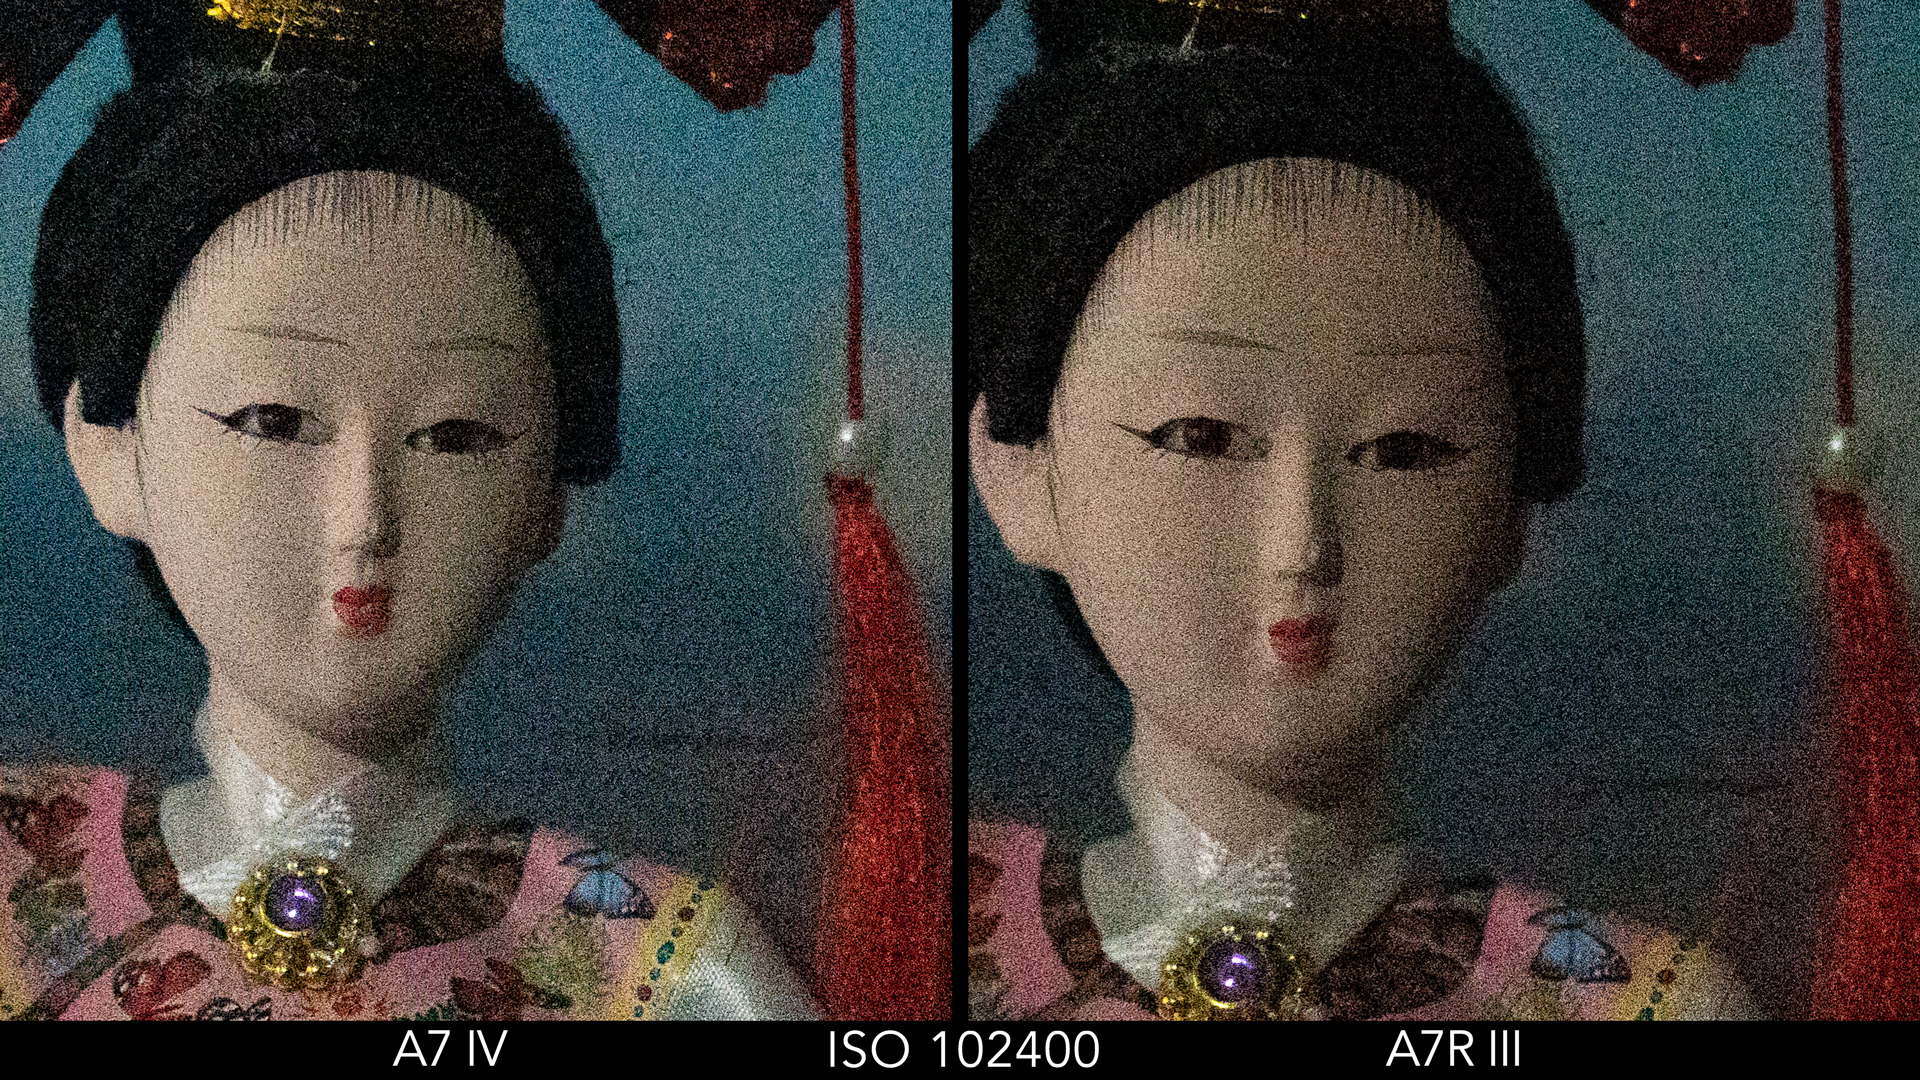 Side by side crop showing the quality at ISO 102400 for the A7 IV and A7R III